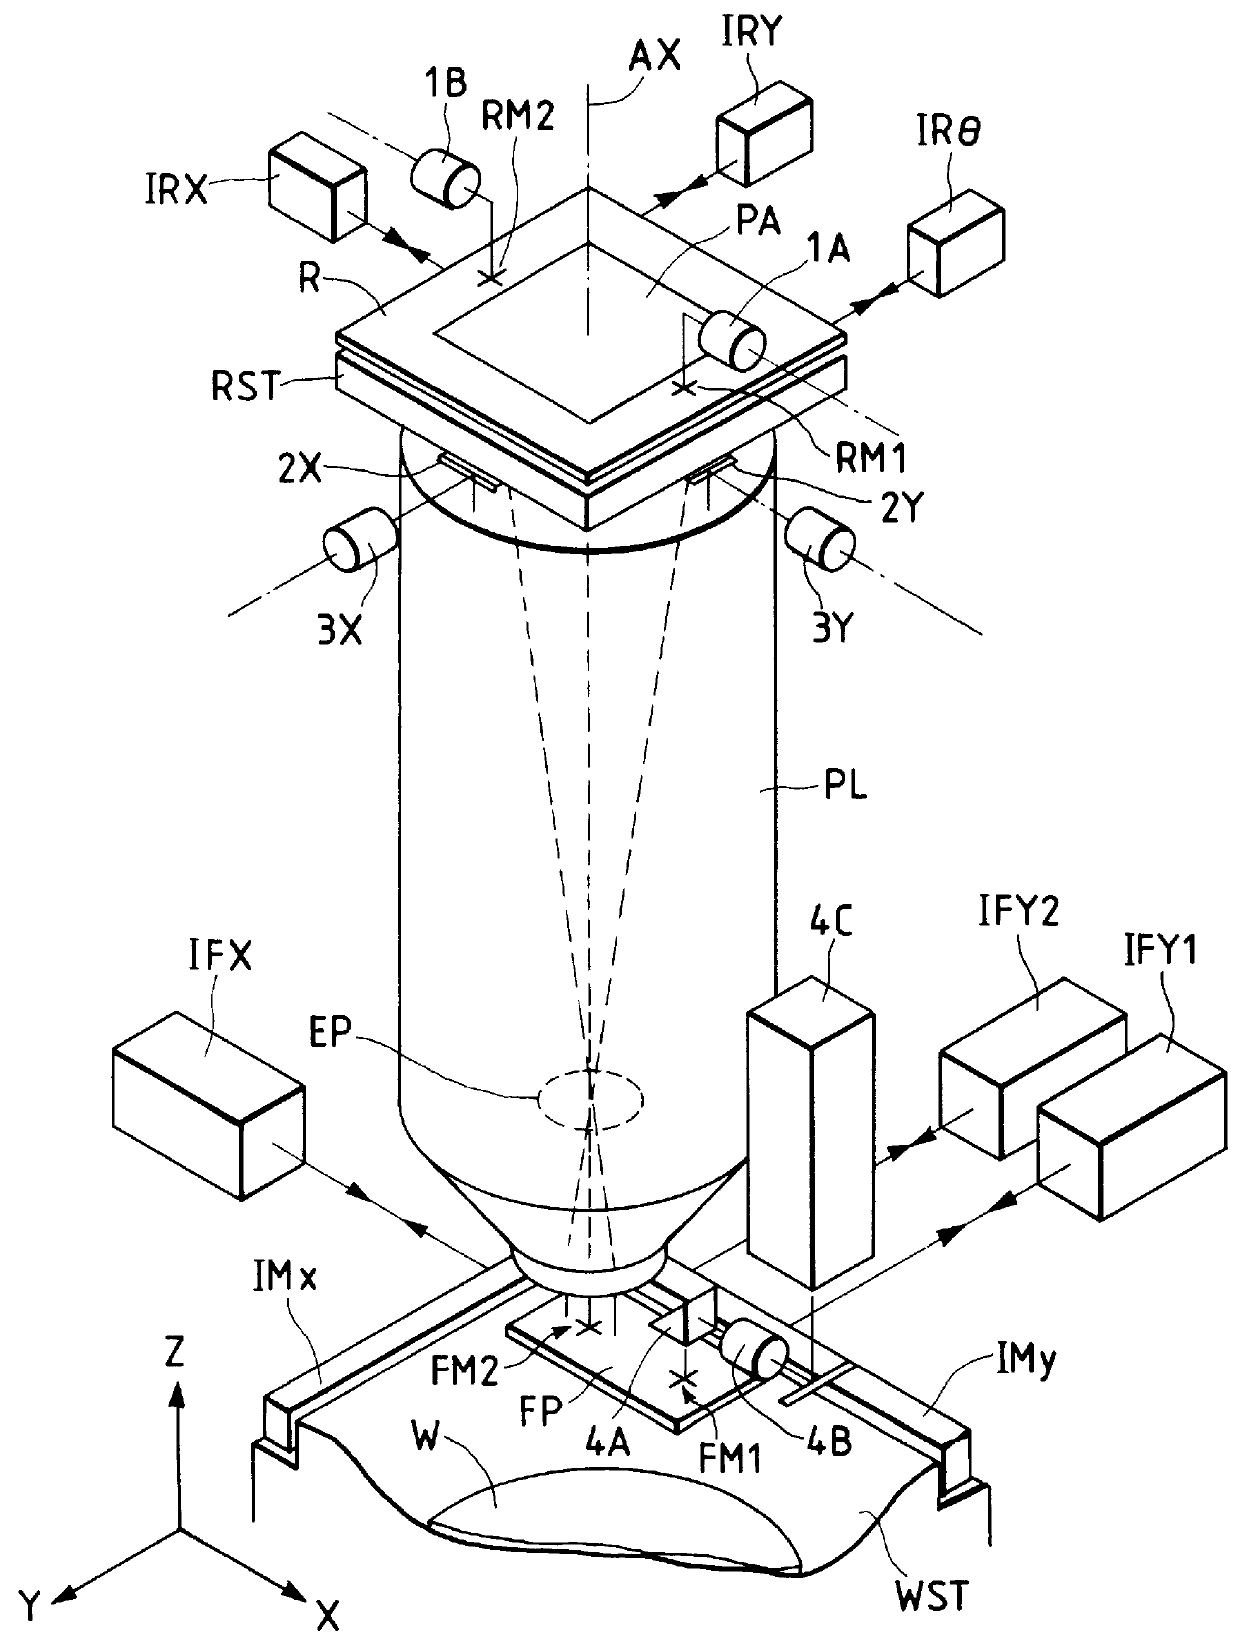 Projection exposure apparatus having an off-axis alignment system and method of alignment therefor